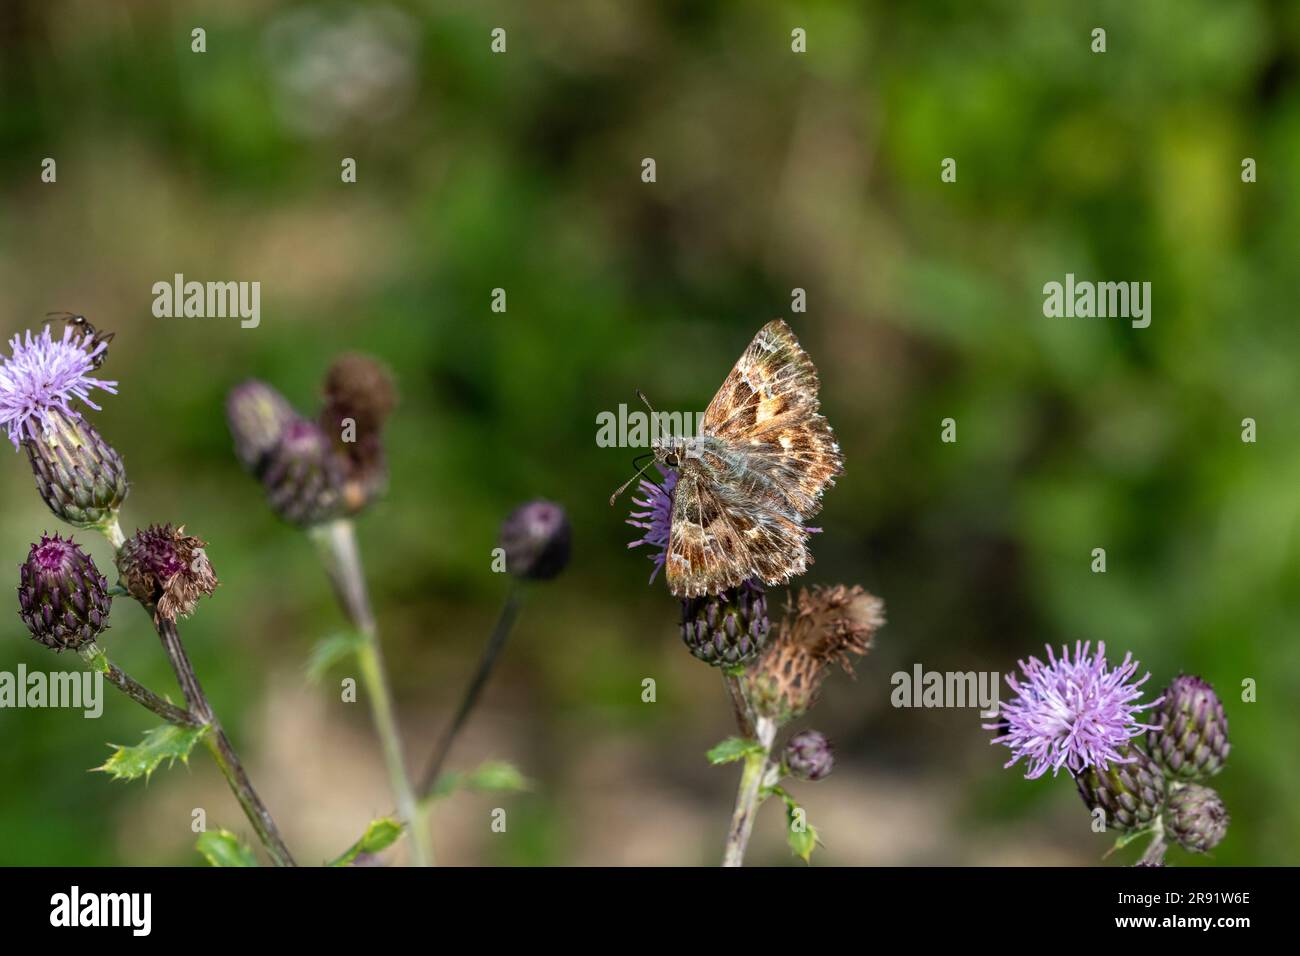 A Mallow skipper (Carcharodus alceae) perched on purple thistle flowers. Stock Photo